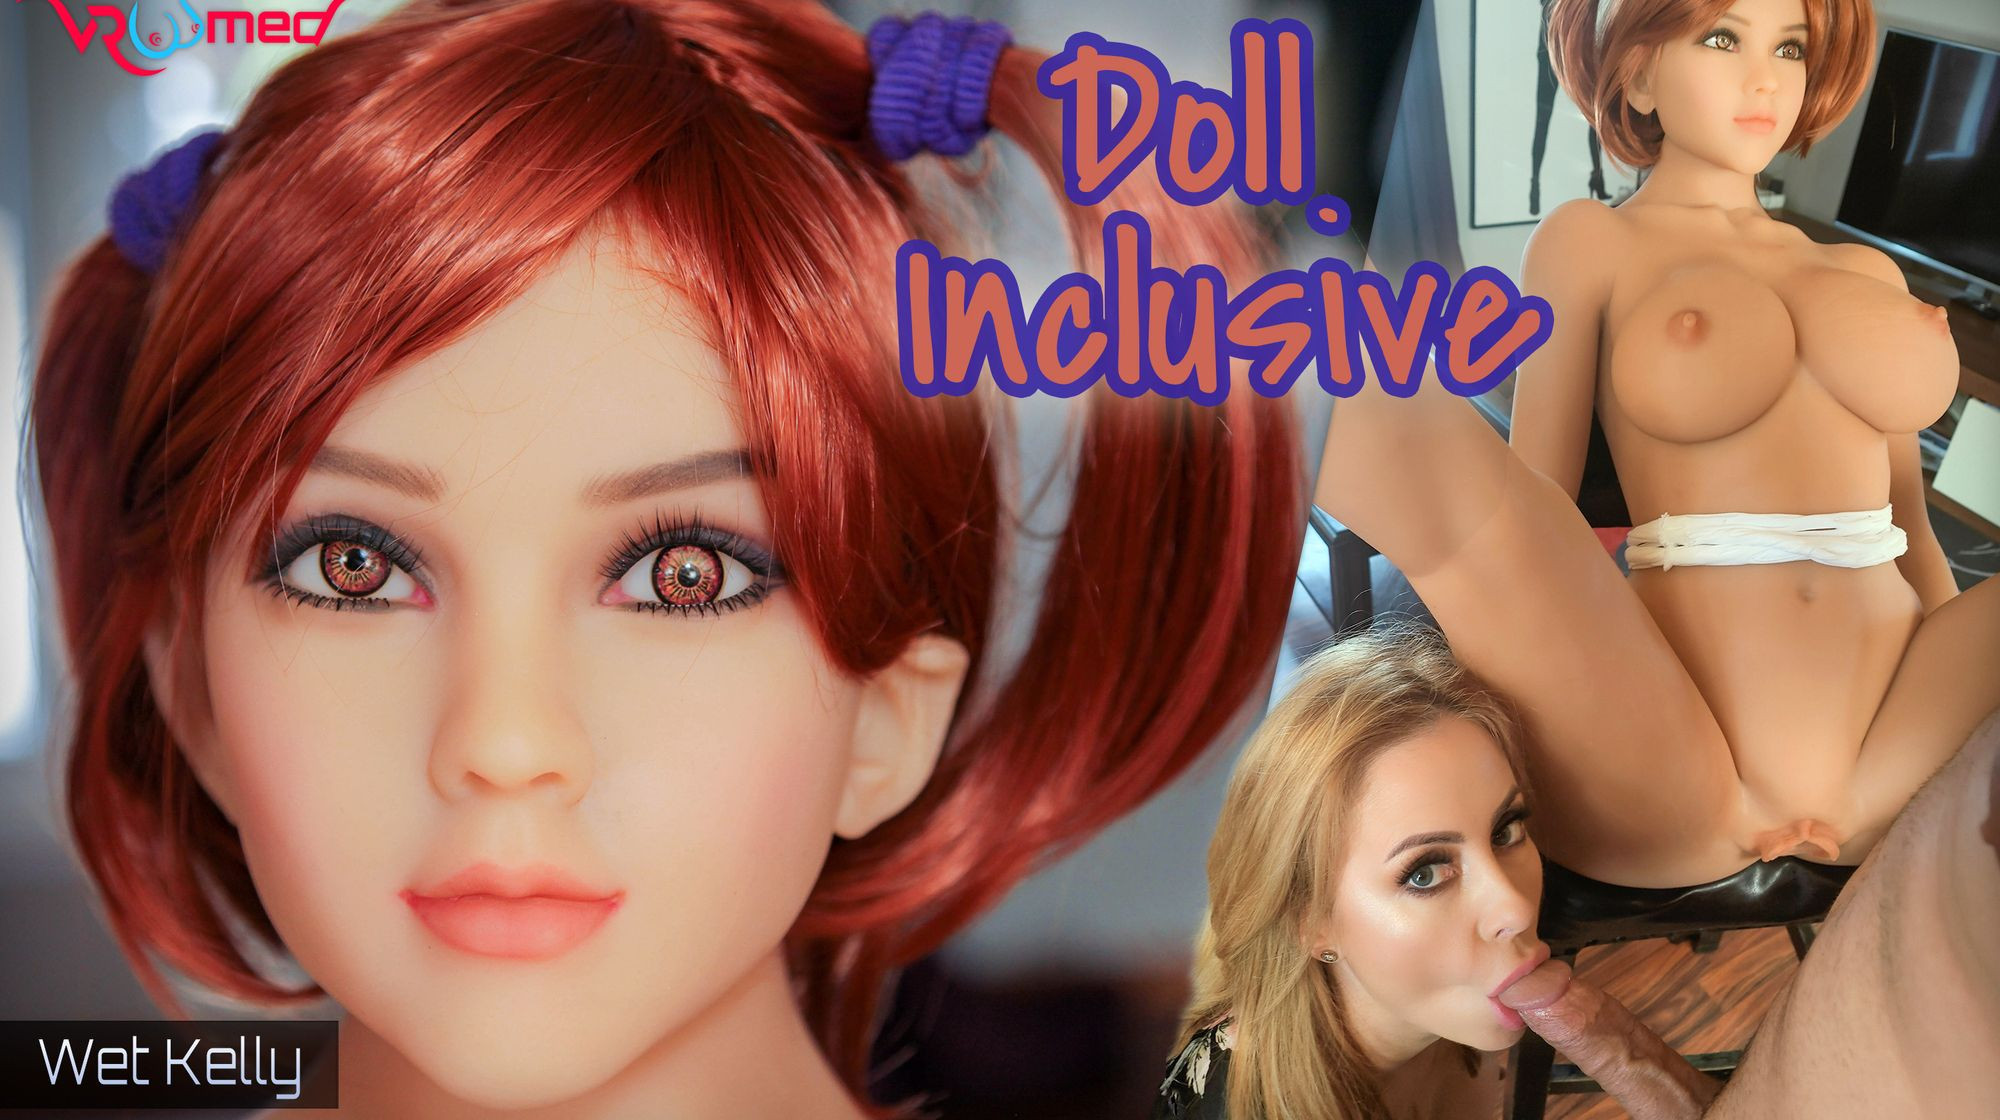 Doll Inclusive: Wet Kelly Slideshow